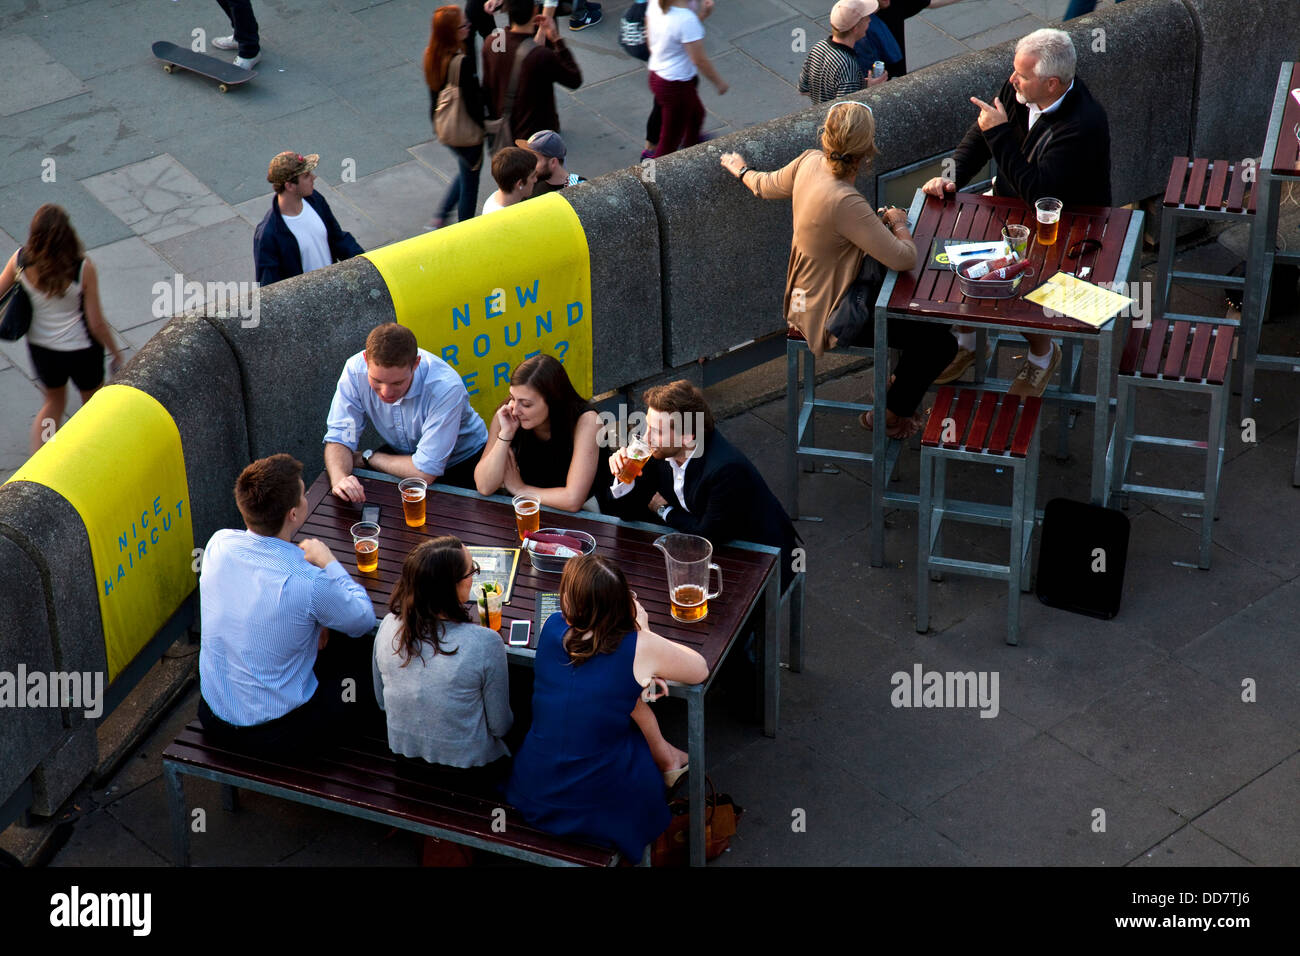 Londoners relaxing at an outdoor bar, The Southbank, London, England Stock Photo